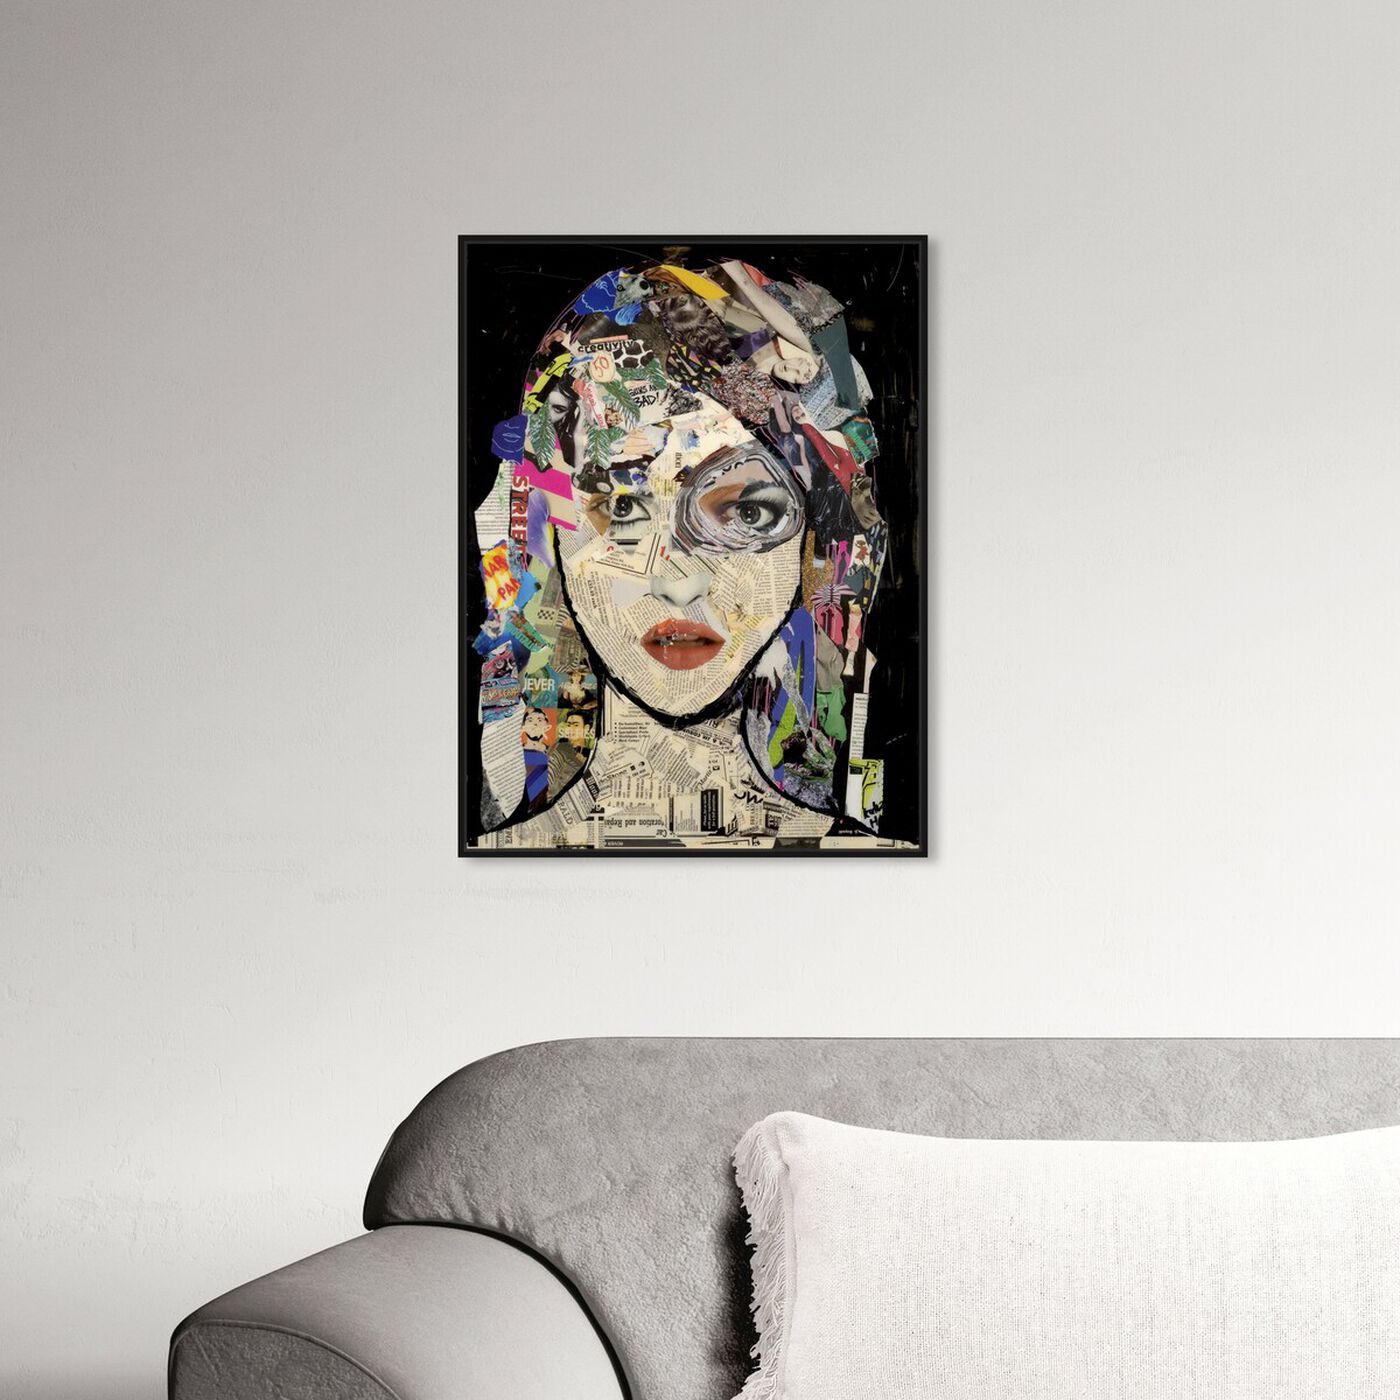 Hanging view of Katy Hirschfeld - Lens featuring people and portraits and portraits art.